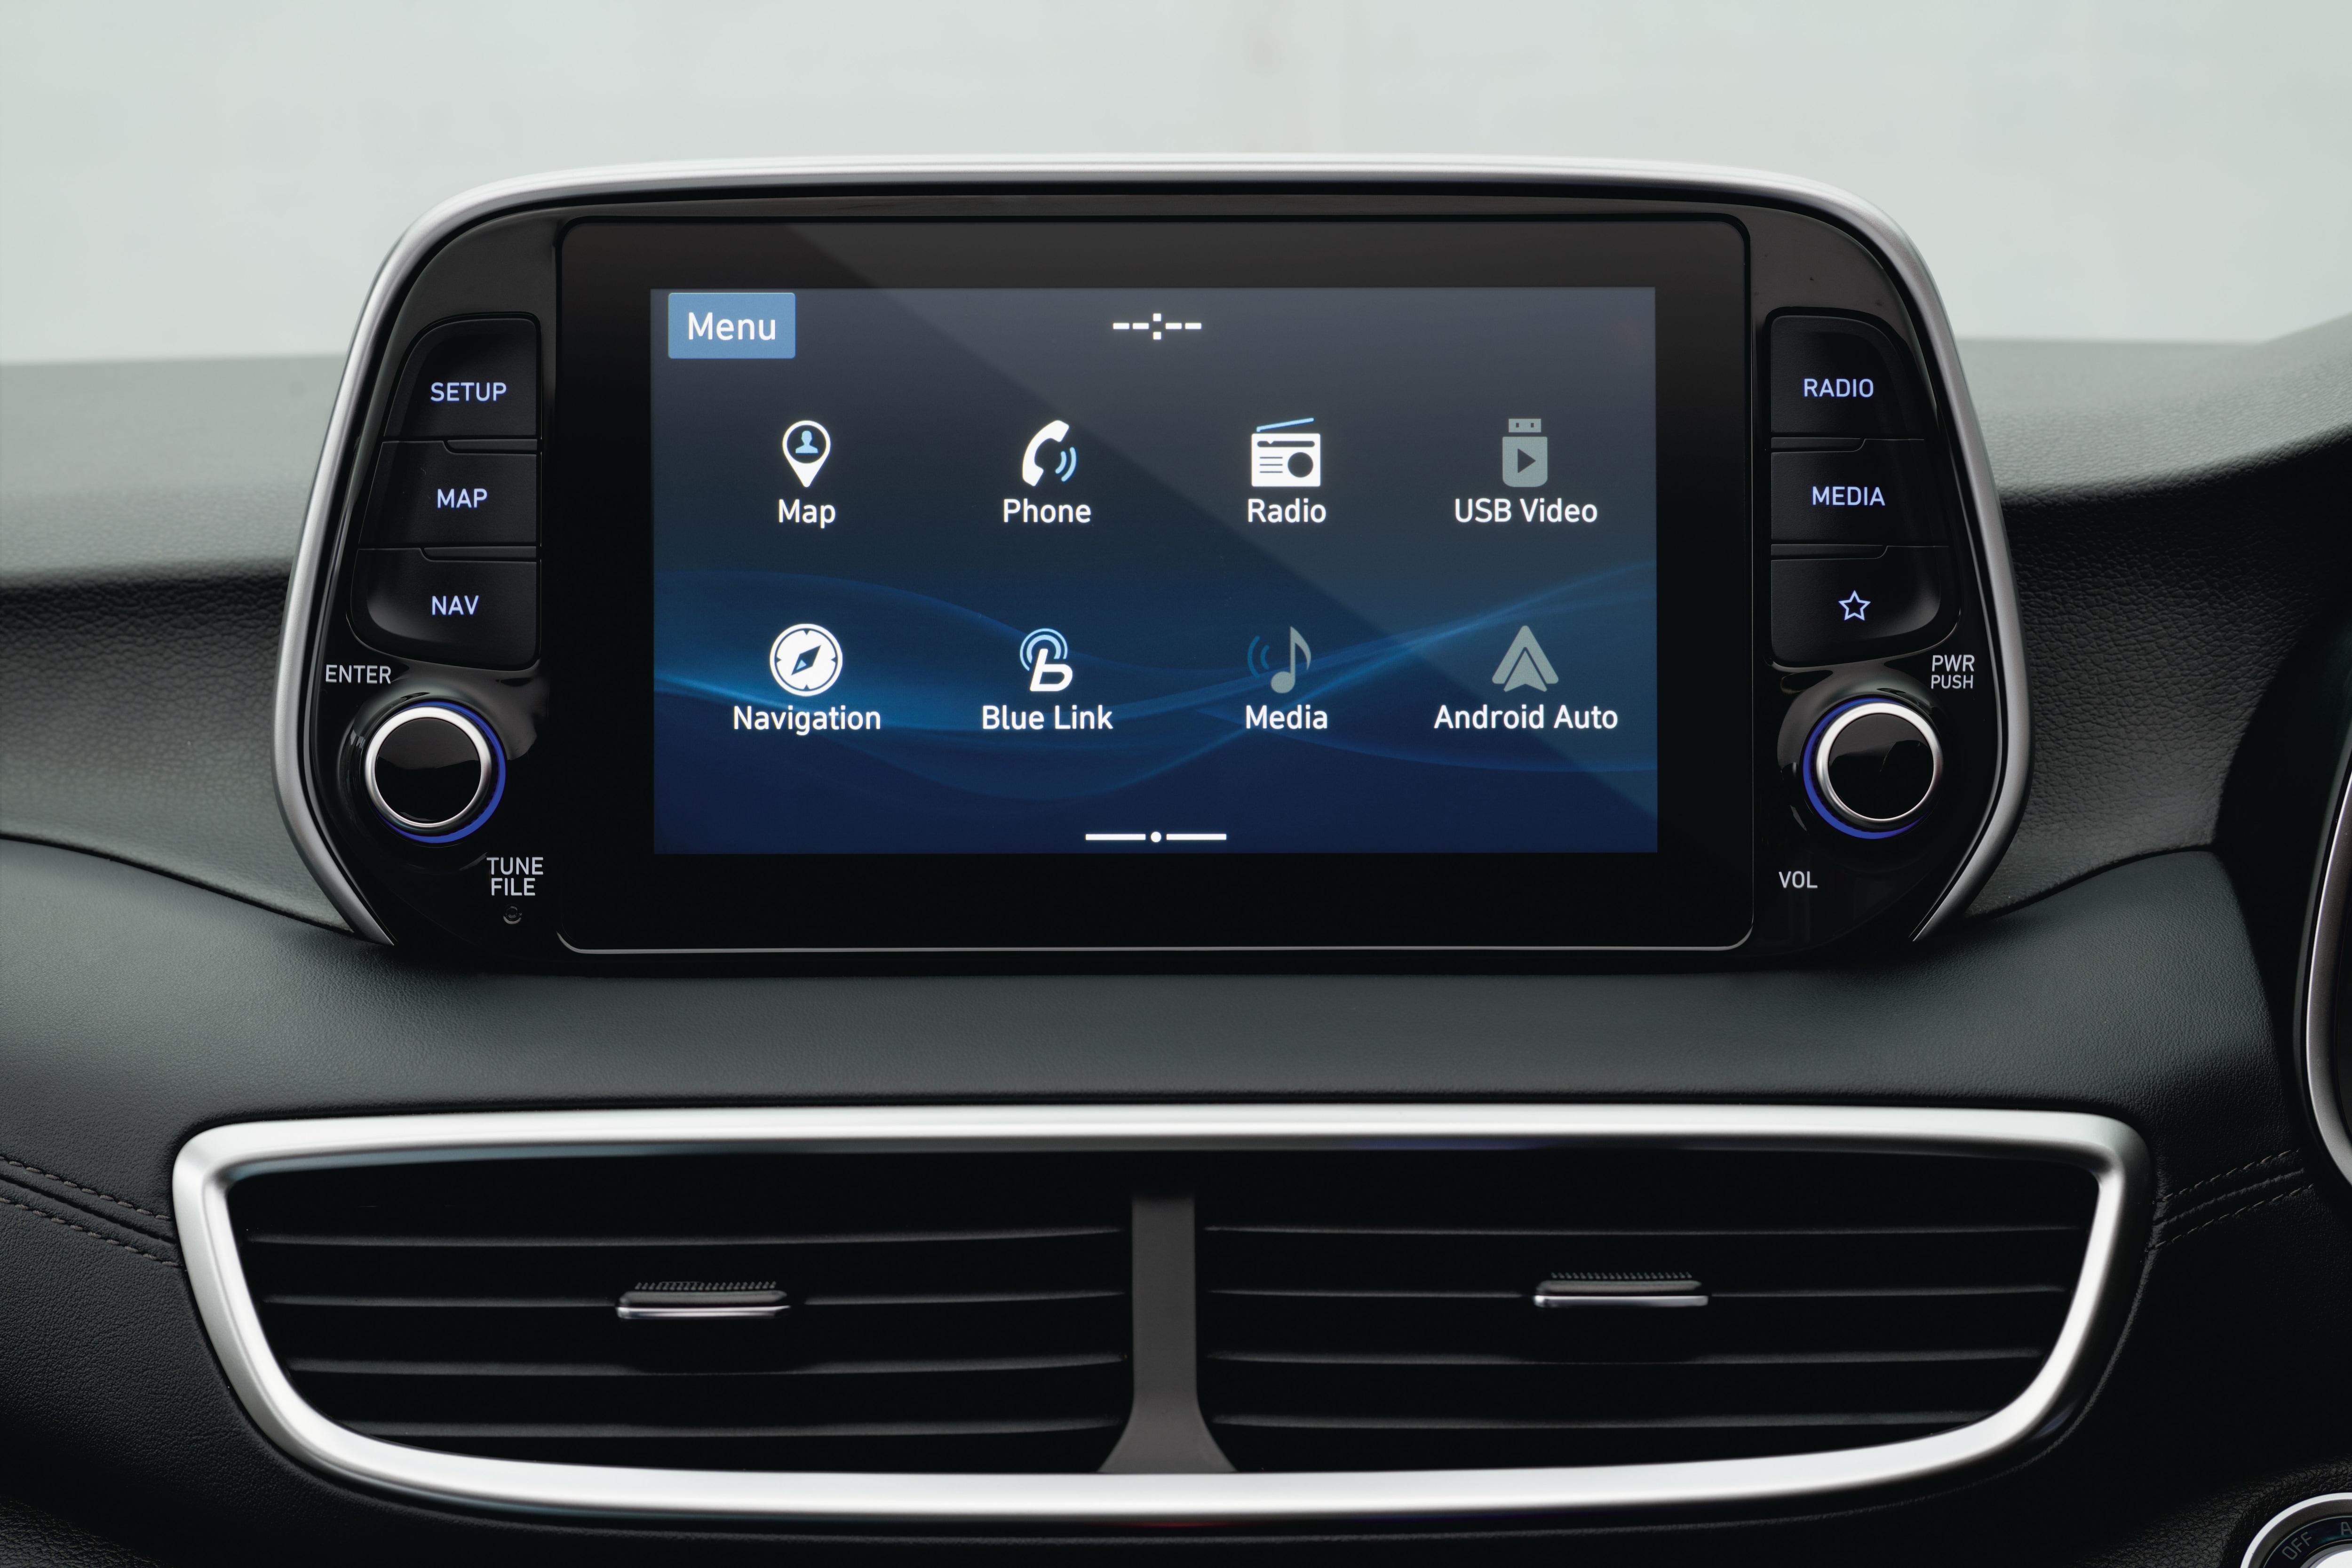 The main infotainment unit inside Tucson 2020 is an eight-inch screen.